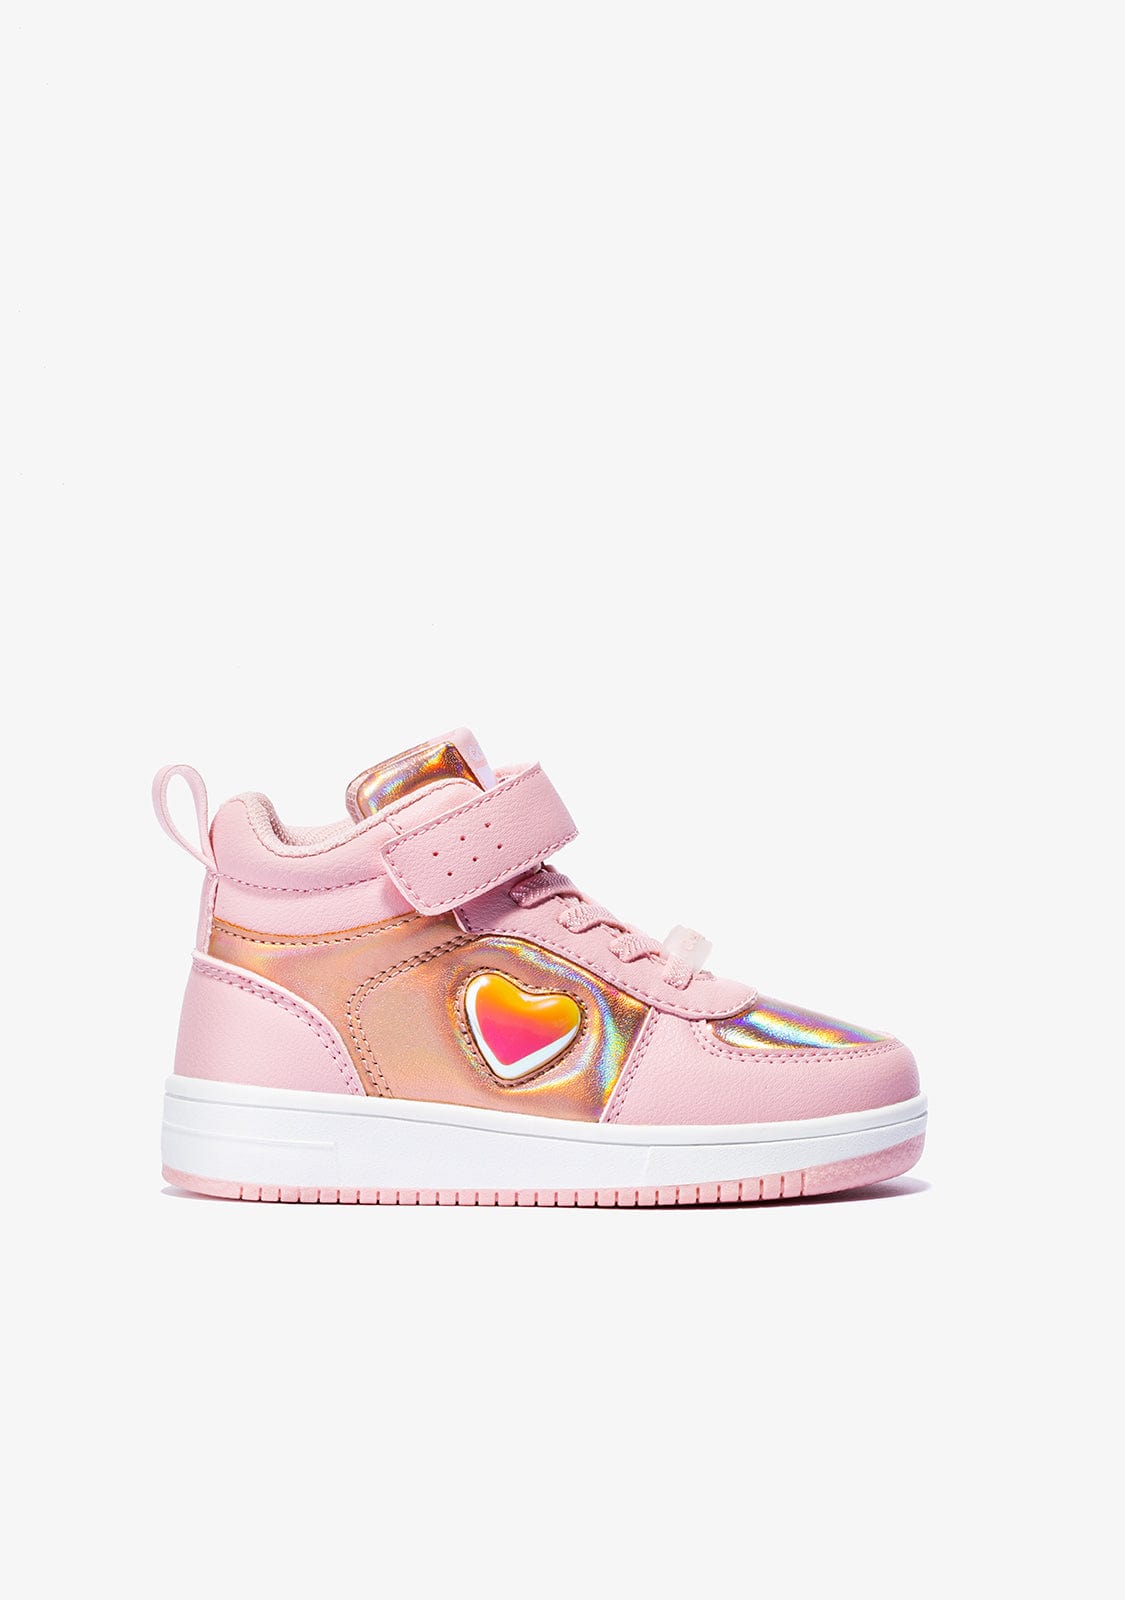 CONGUITOS Shoes Girl's Pink With Lights Heart Hi-Top Sneakers